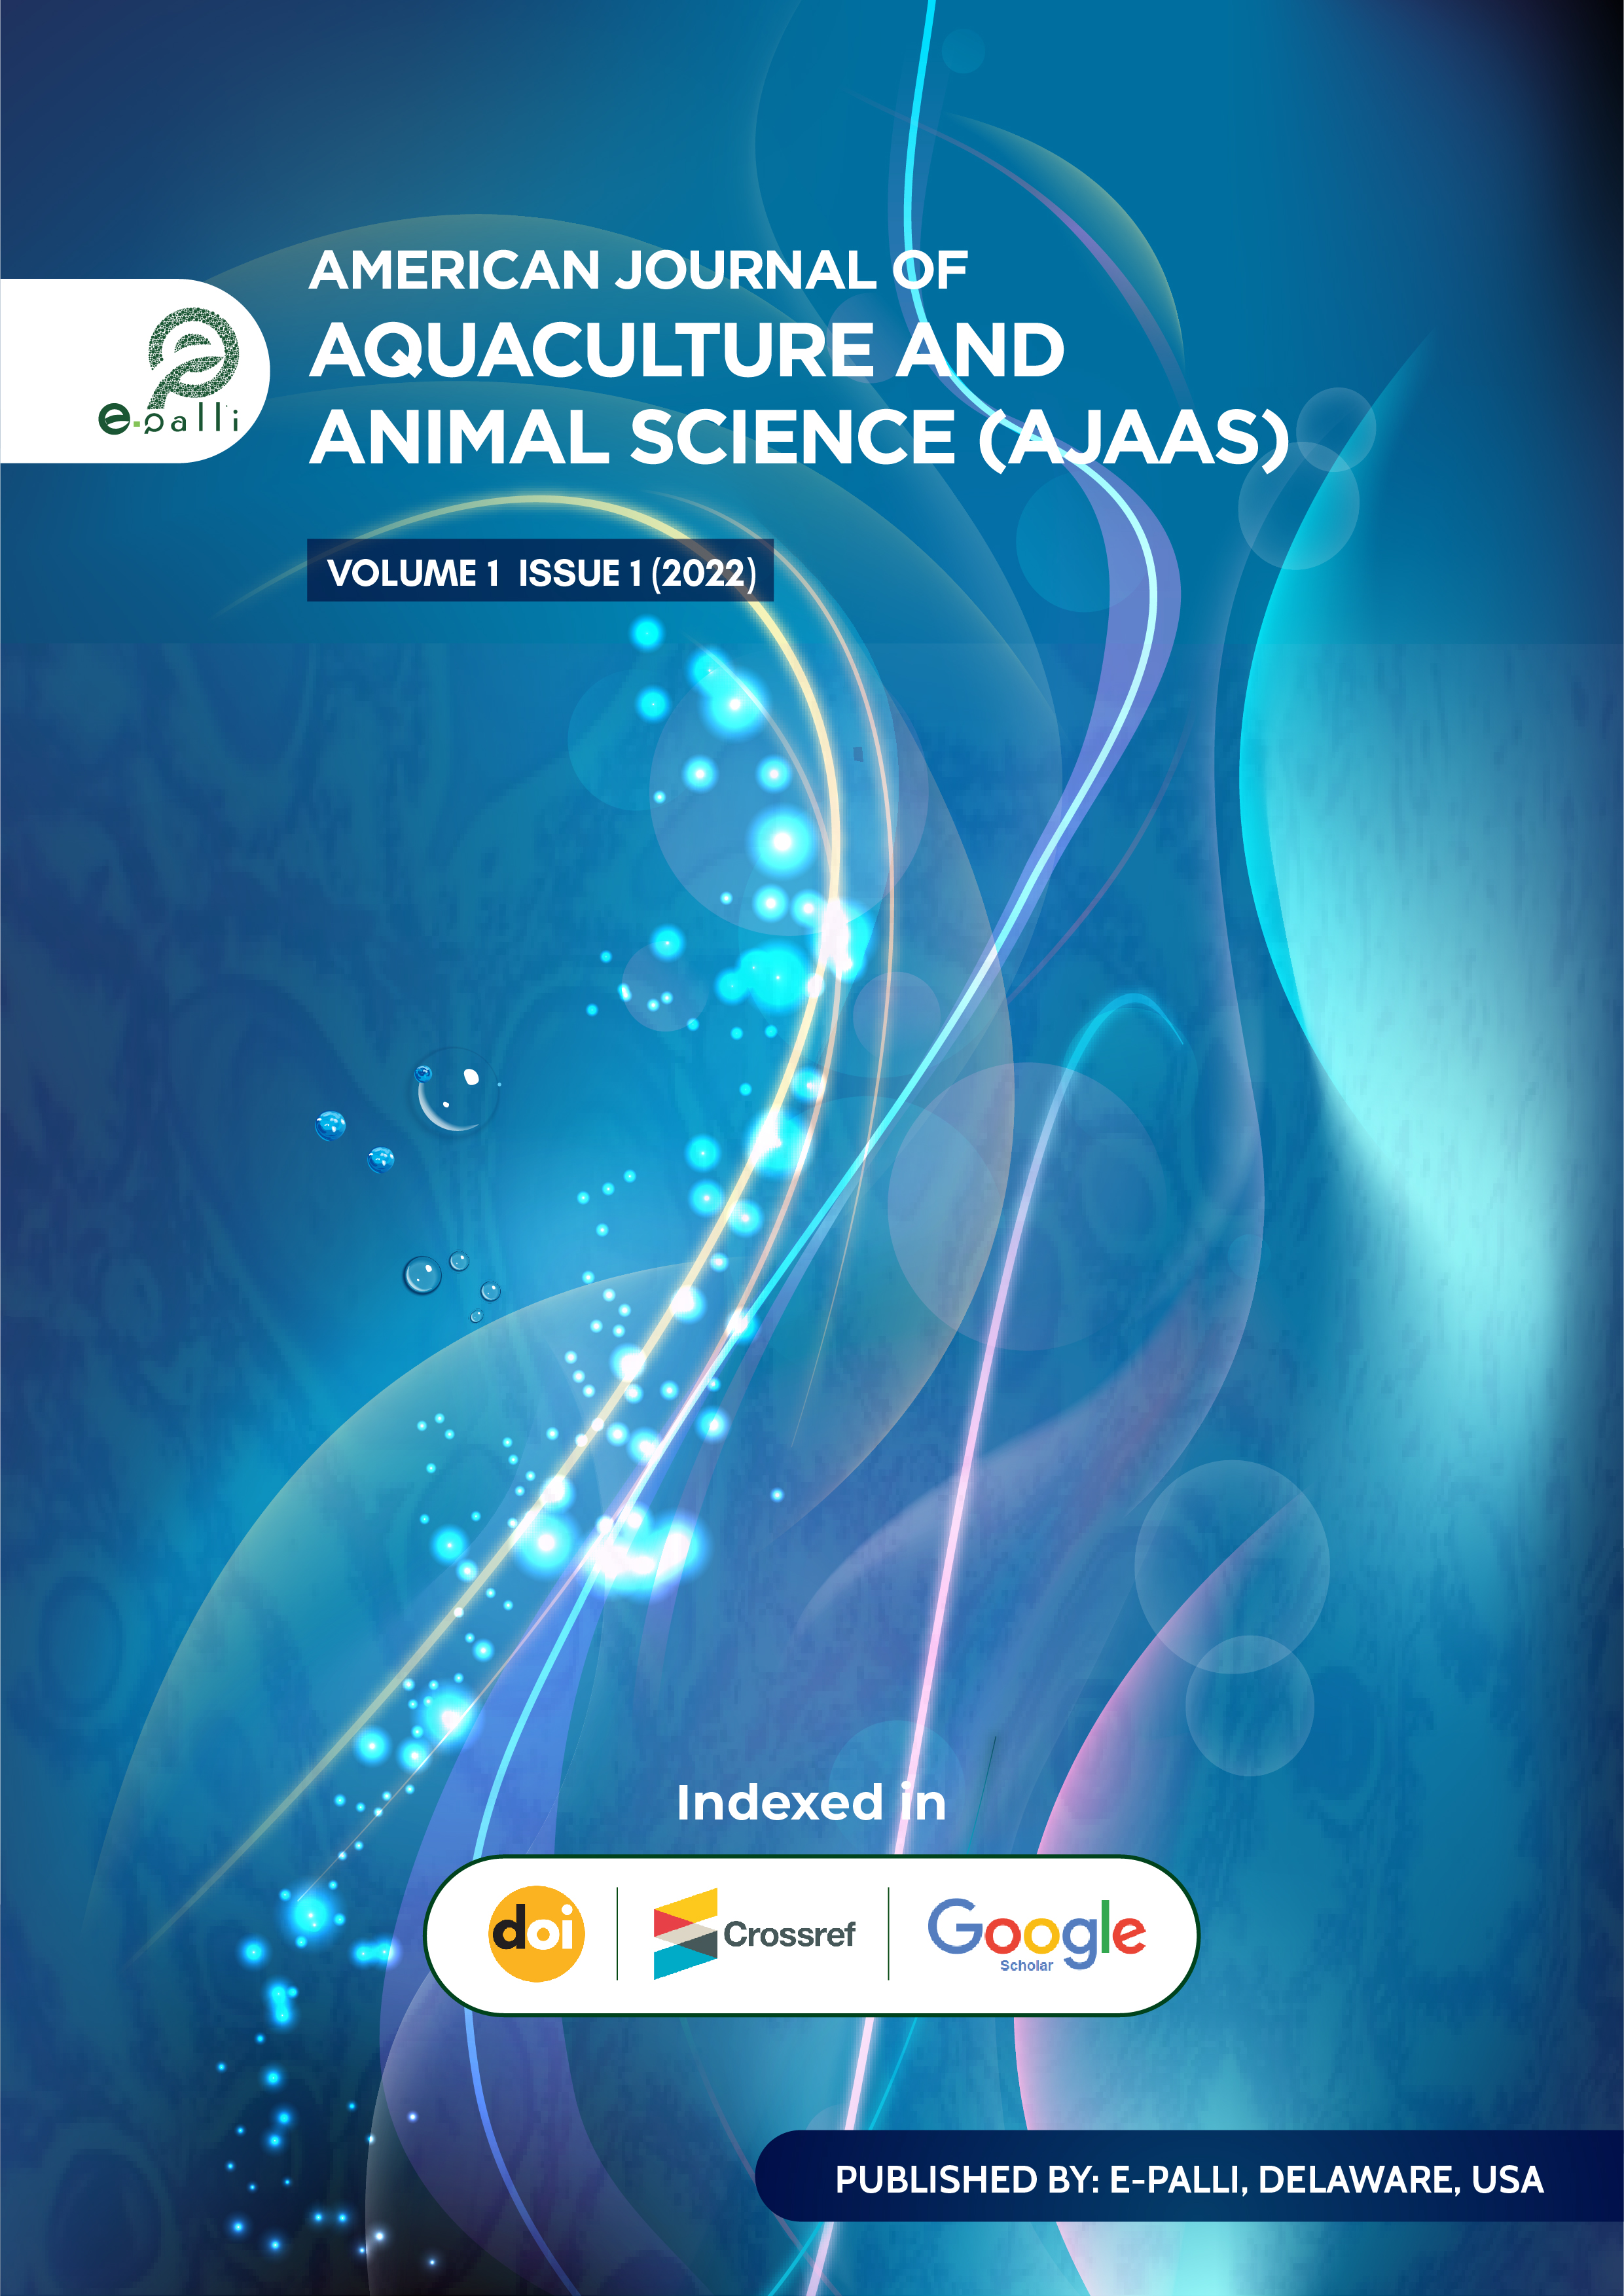 					View Vol. 1 No. 1 (2022): American Journal of Aquaculture and Animal Science
				